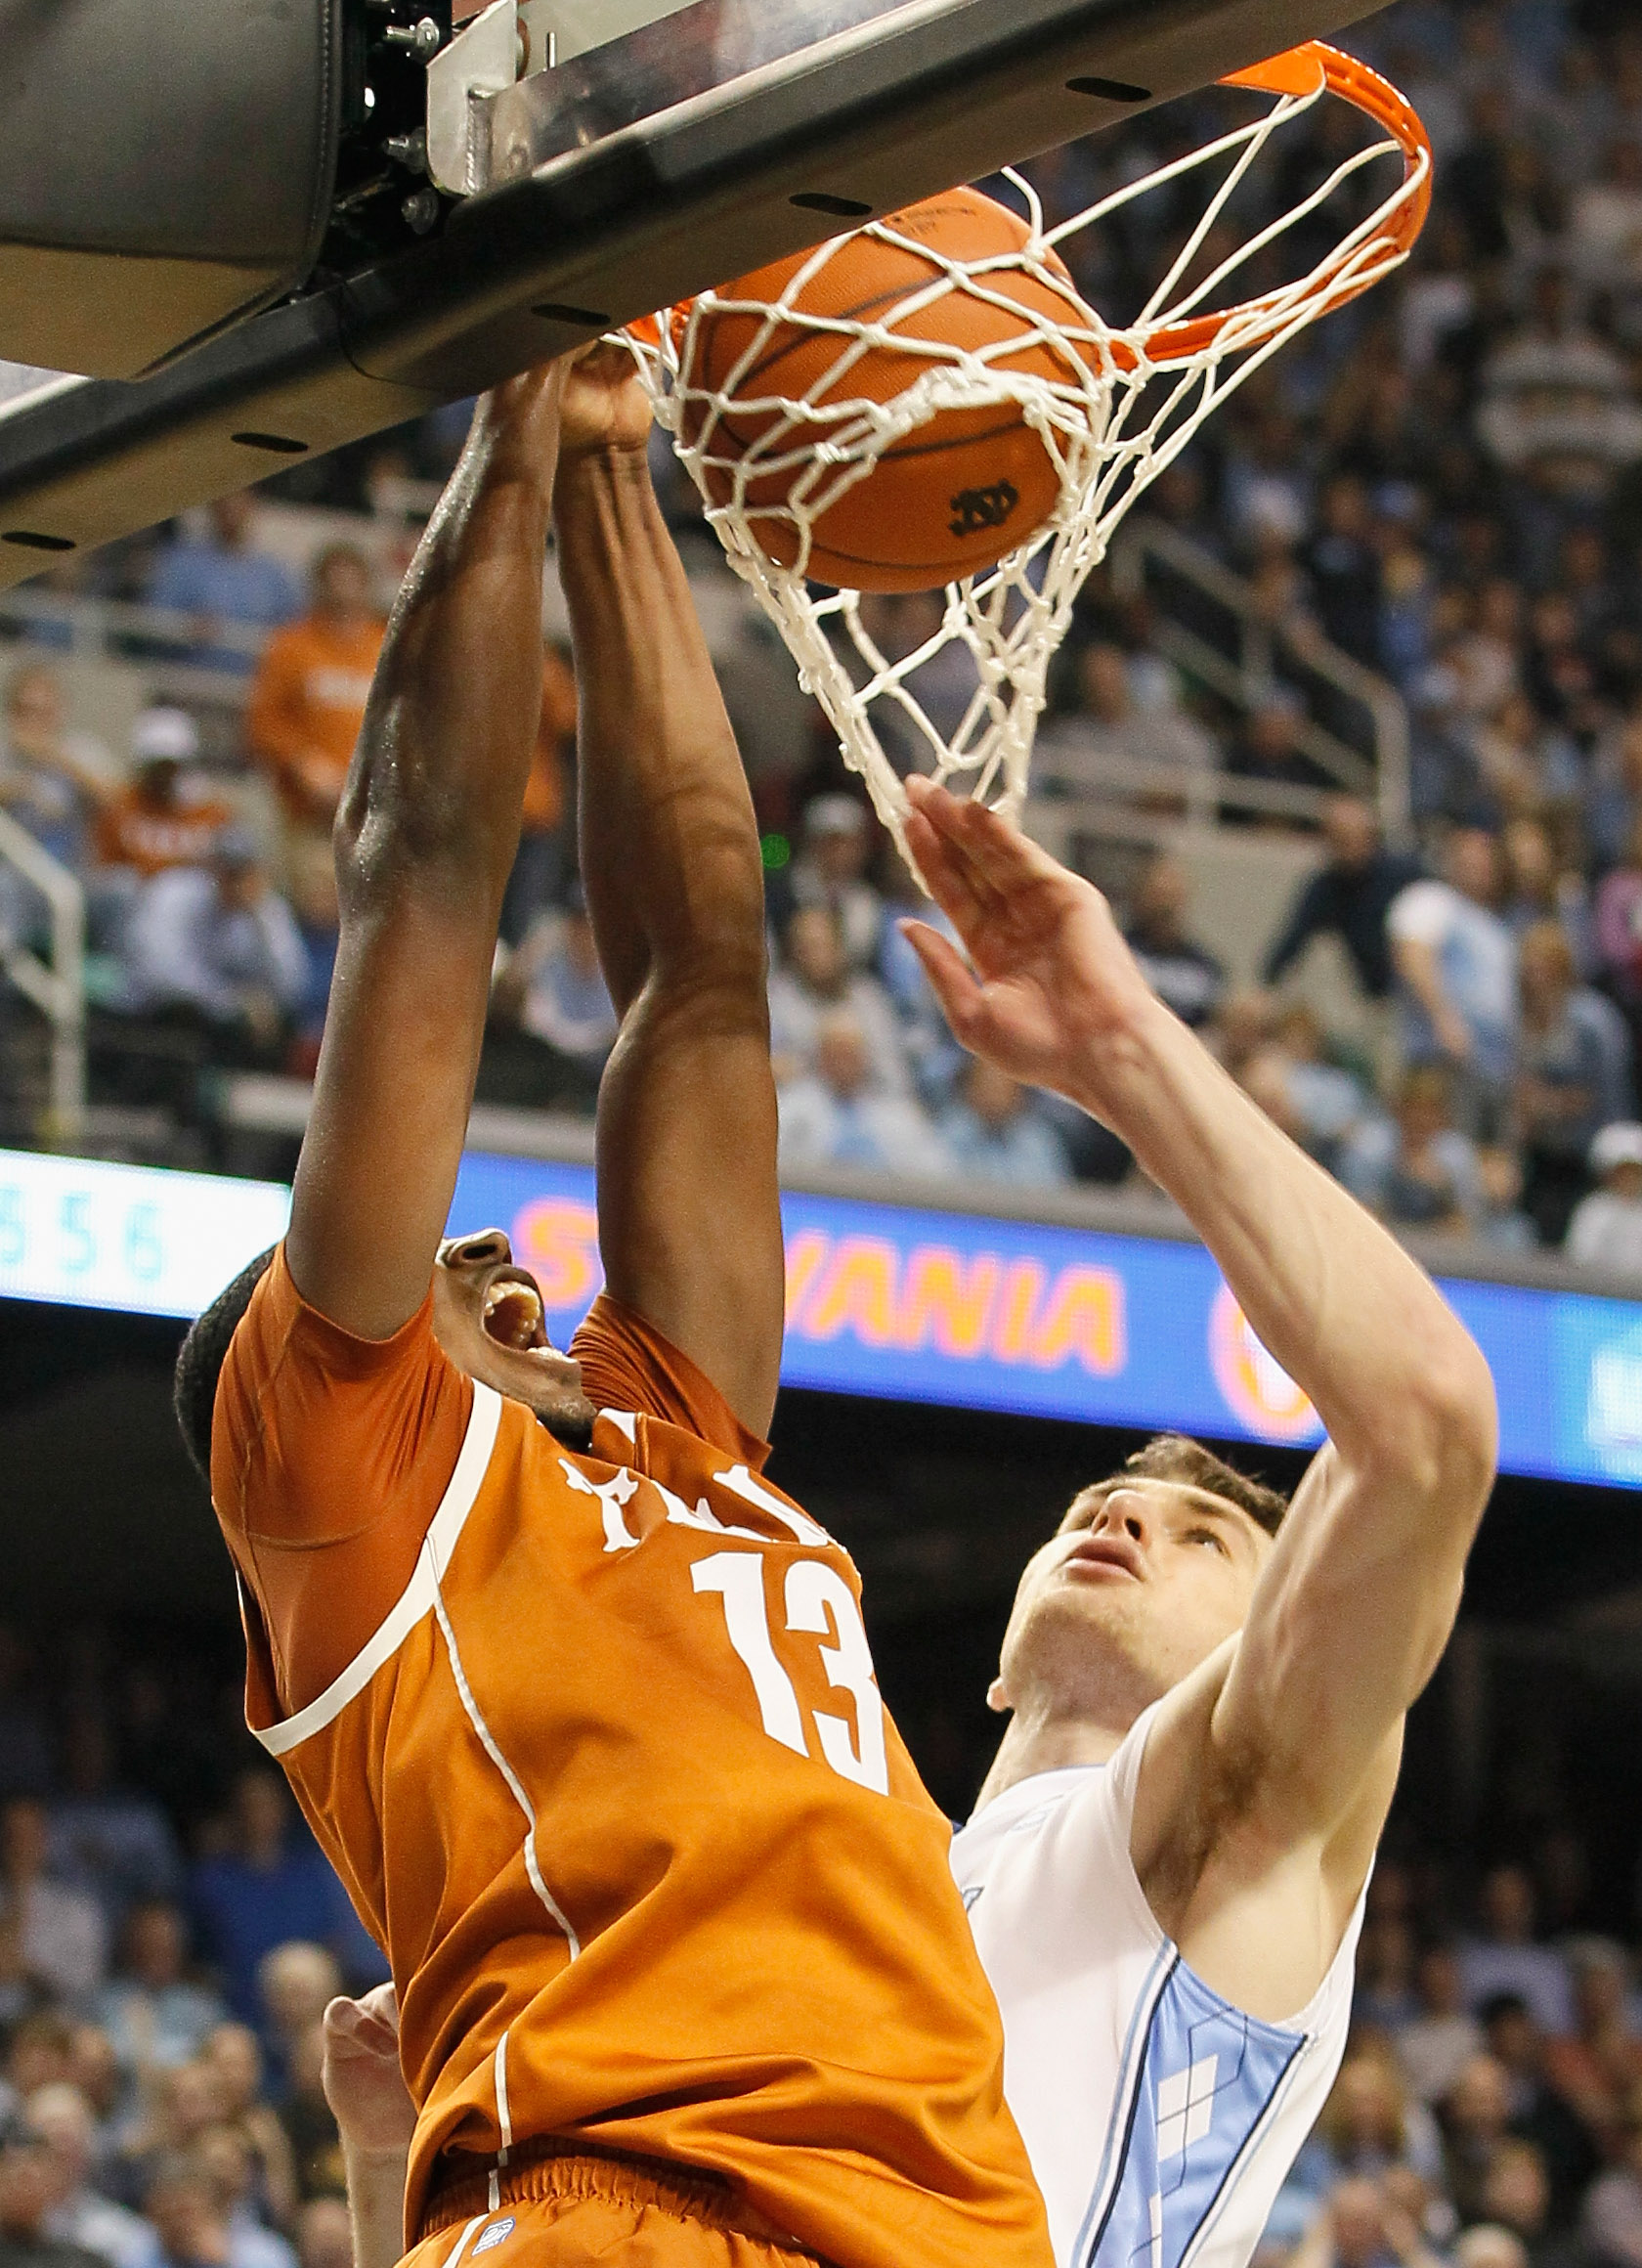 GREENSBORO, NC - DECEMBER 18:  Tristan Thompson #13 of the Texas Longhorns dunks against Tyler Zeller #44 of the North Carolina Tar Heels at Greensboro Coliseum on December 18, 2010 in Greensboro, North Carolina.  (Photo by Kevin C. Cox/Getty Images)